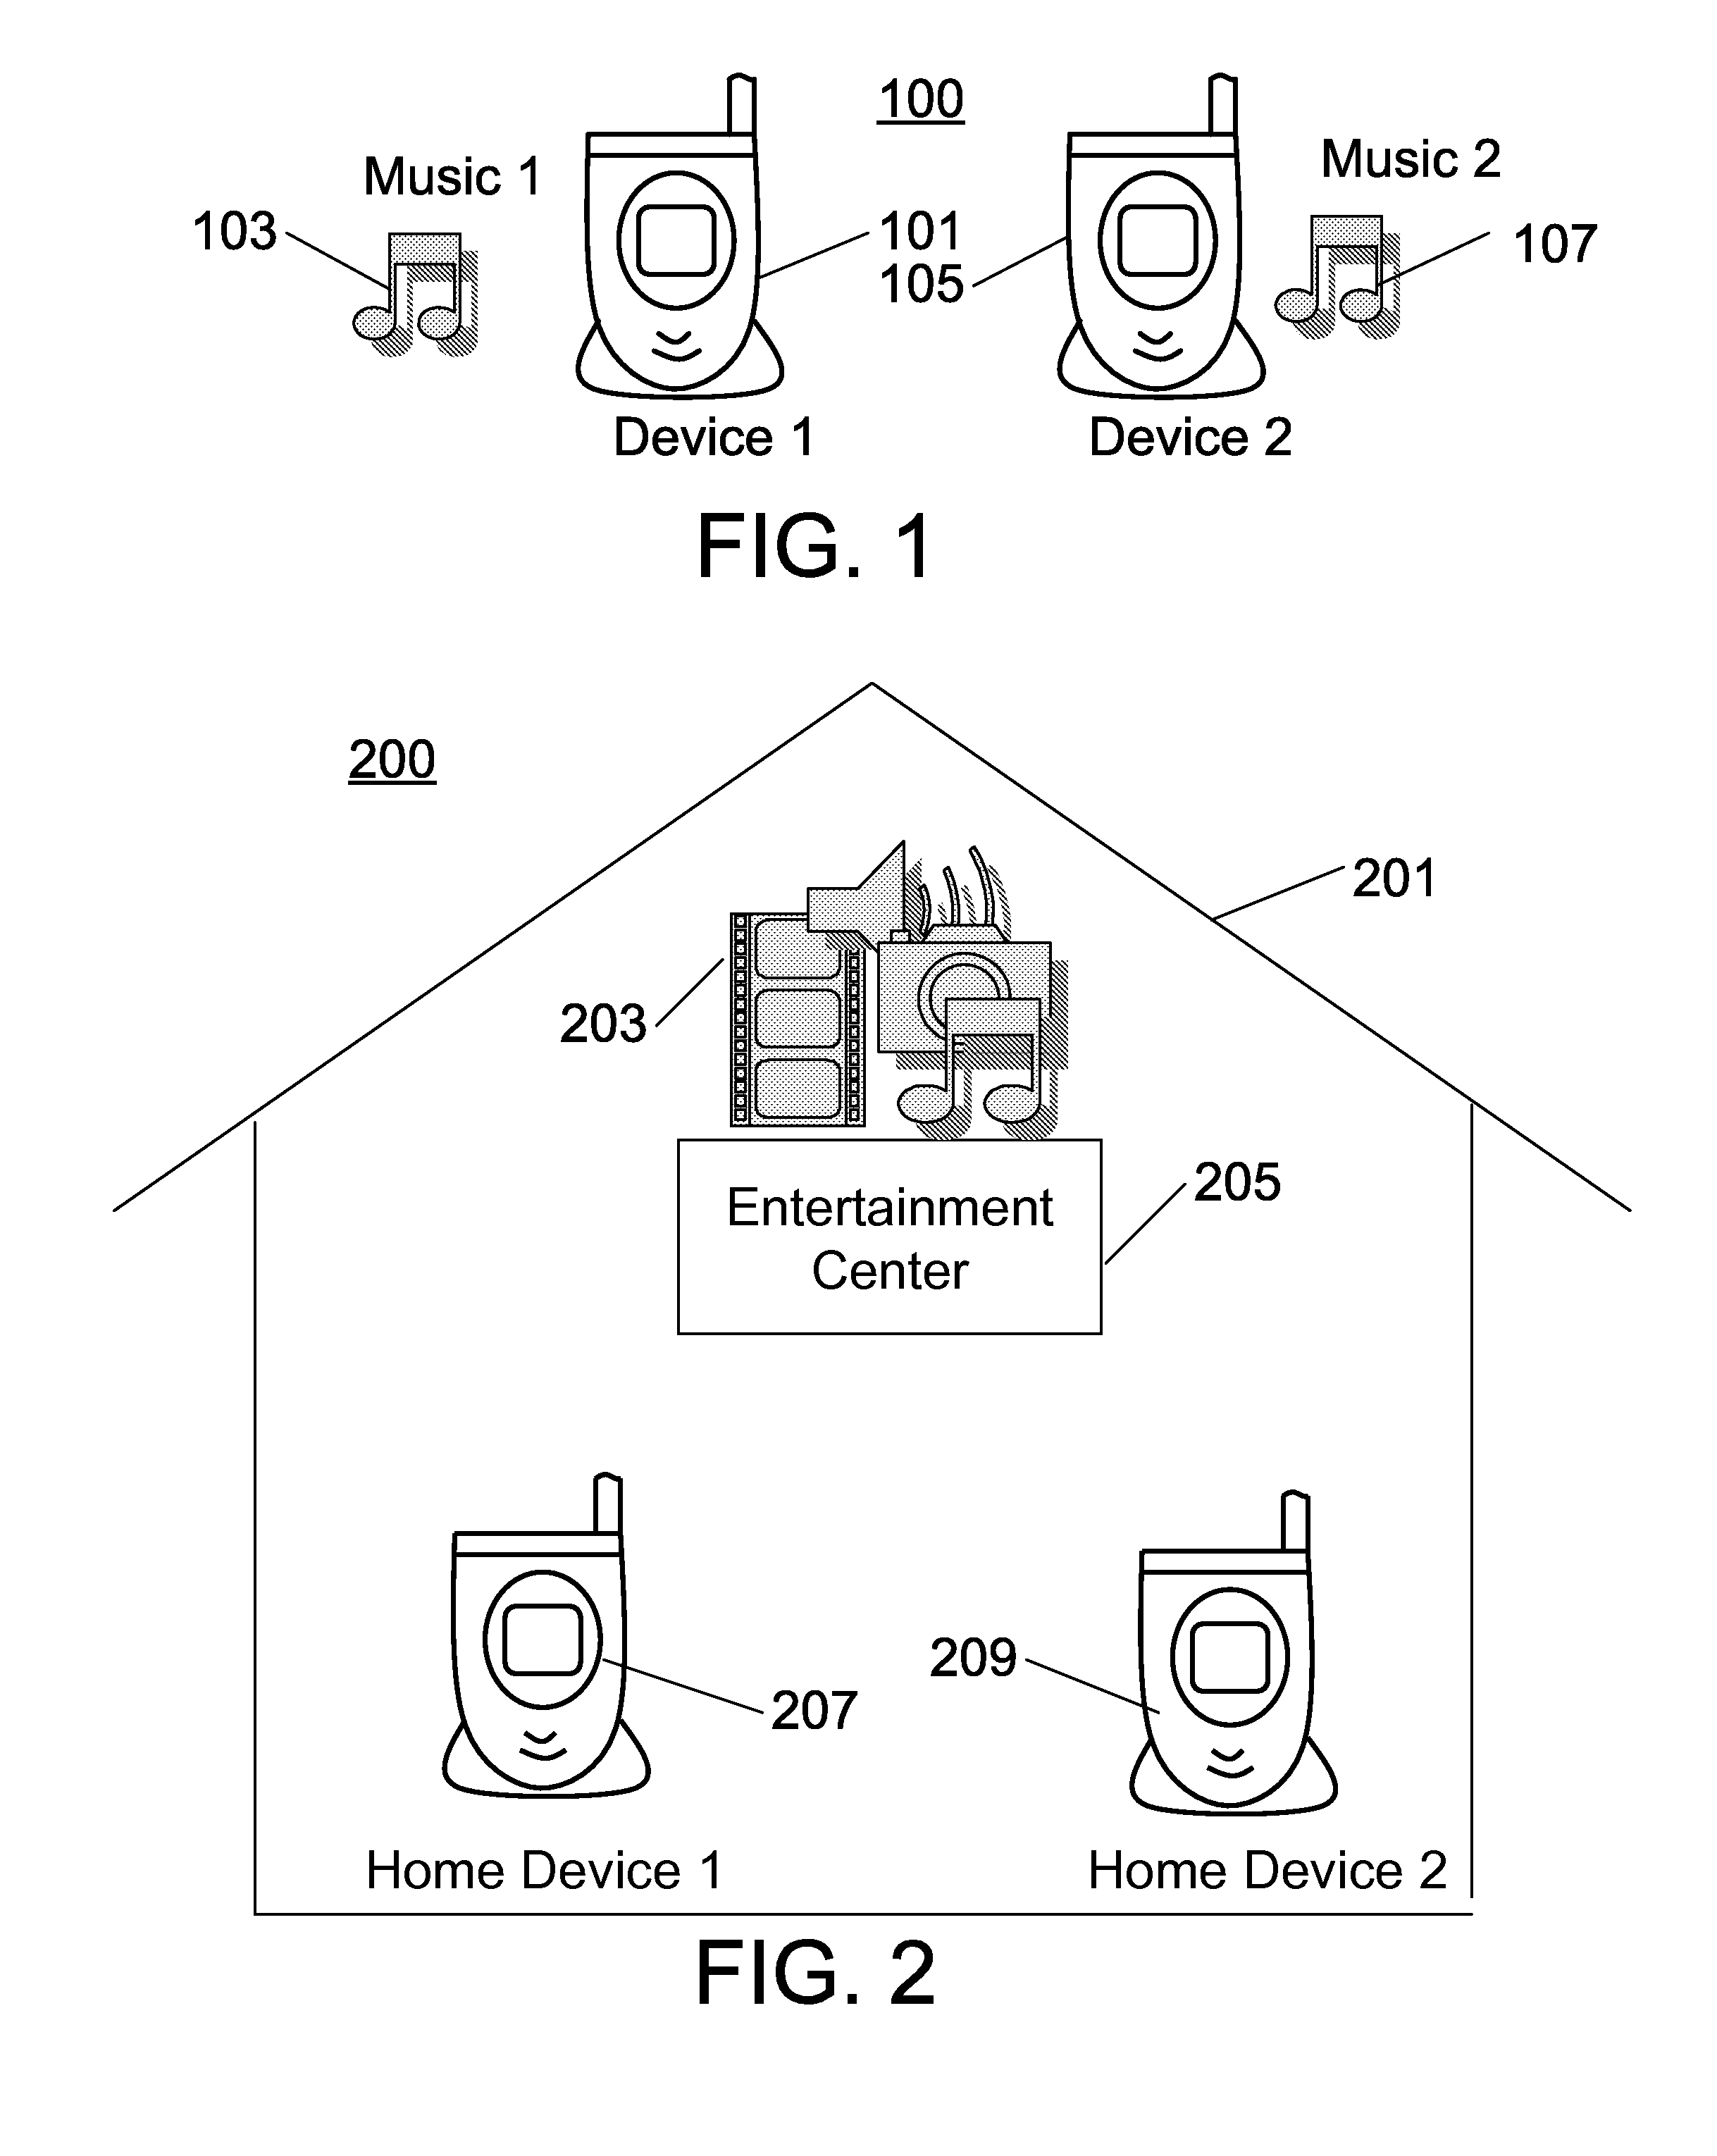 Adaptive secure authenticated channels for direct sharing of protected content between devices